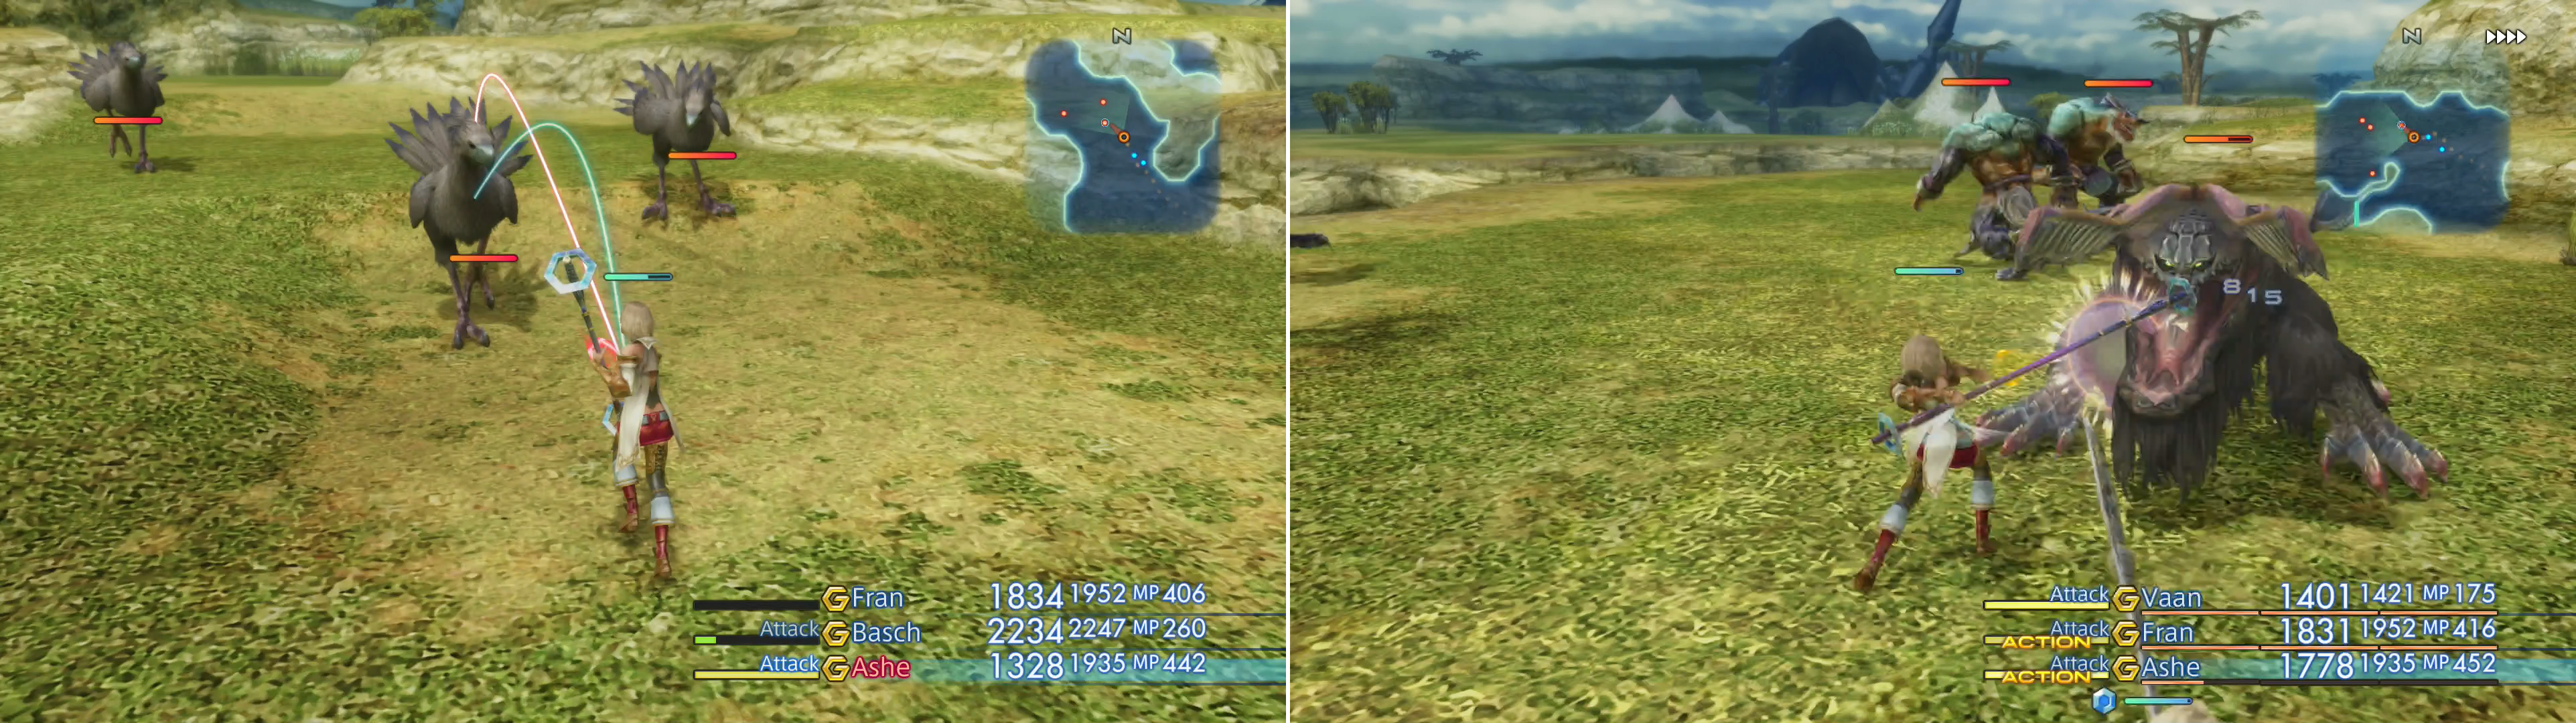 Not all Chocobos are friendly, as evidenced by the specimens on the Ozmone Plain (left). The elusive Hybrid Gator appears in different locations depending on the minutes on the game clock (right).